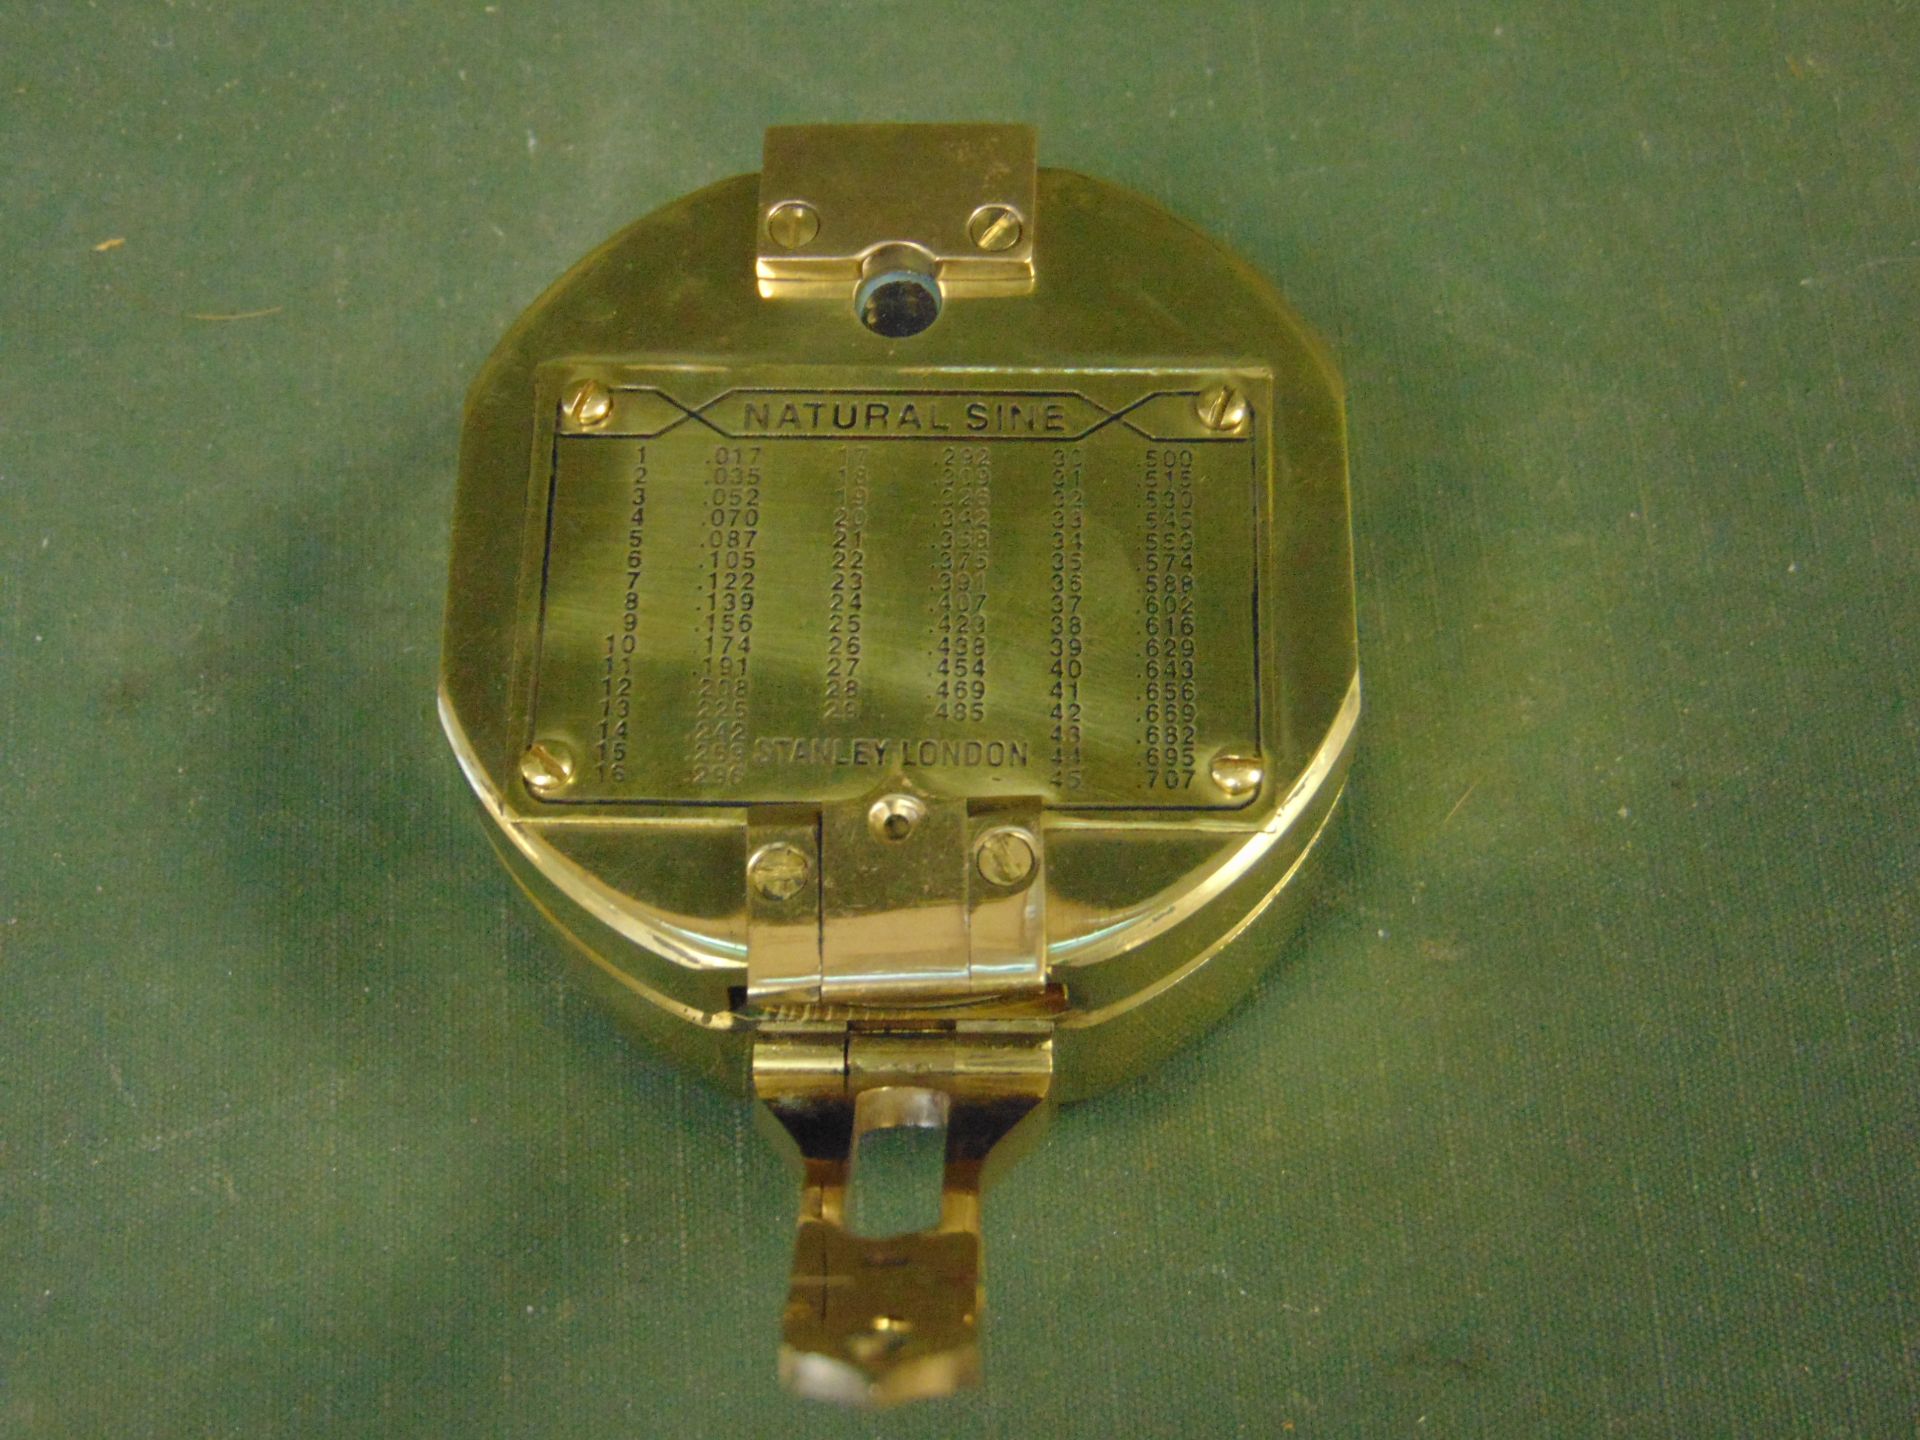 VERY NICE BRASS PRISMATIC COMPASS REPRO - Image 4 of 6